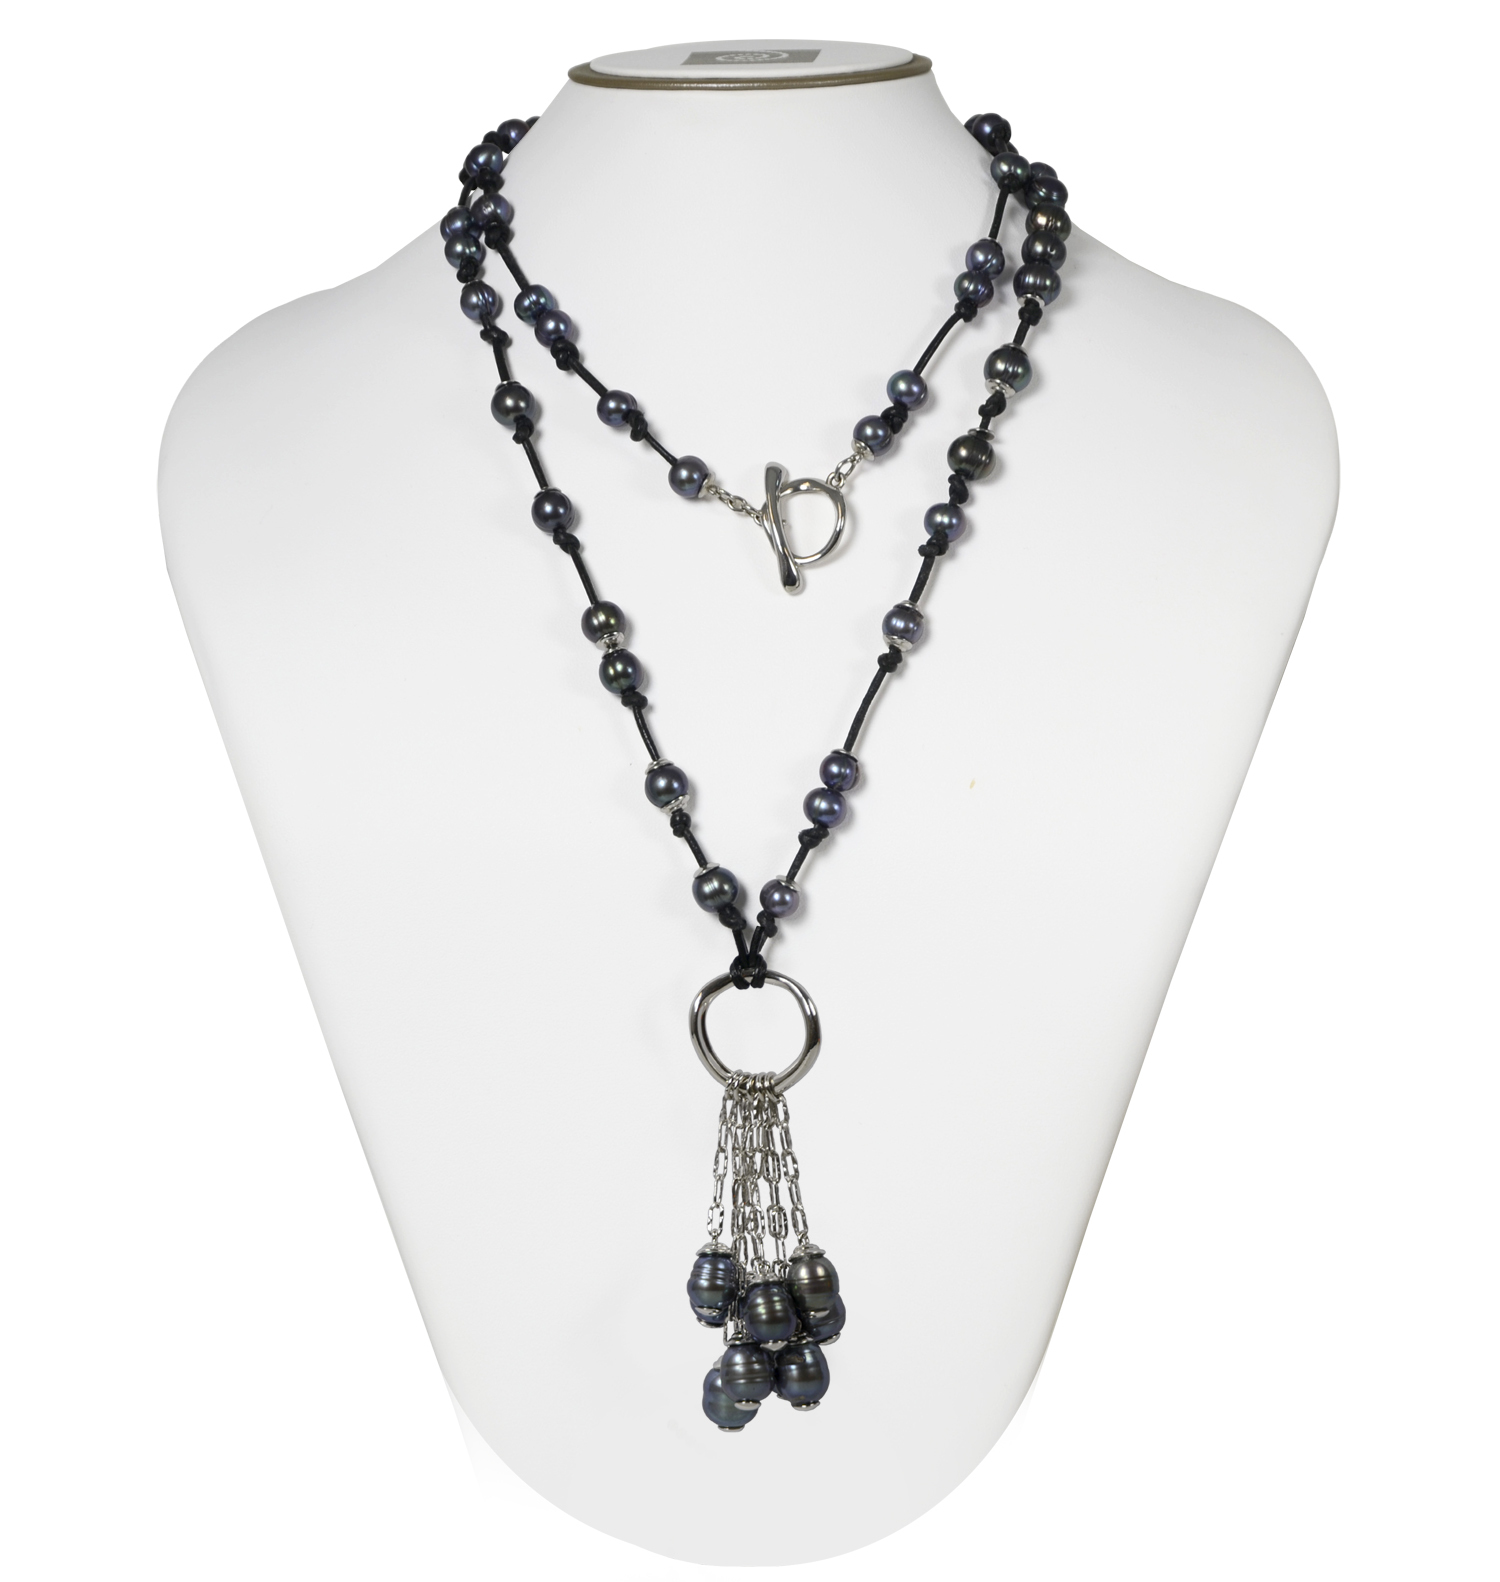 Sterling Silver 7-10mm Black Ringed Freshwater Cultured Pearl on Black Leather 36 Tassle Necklace